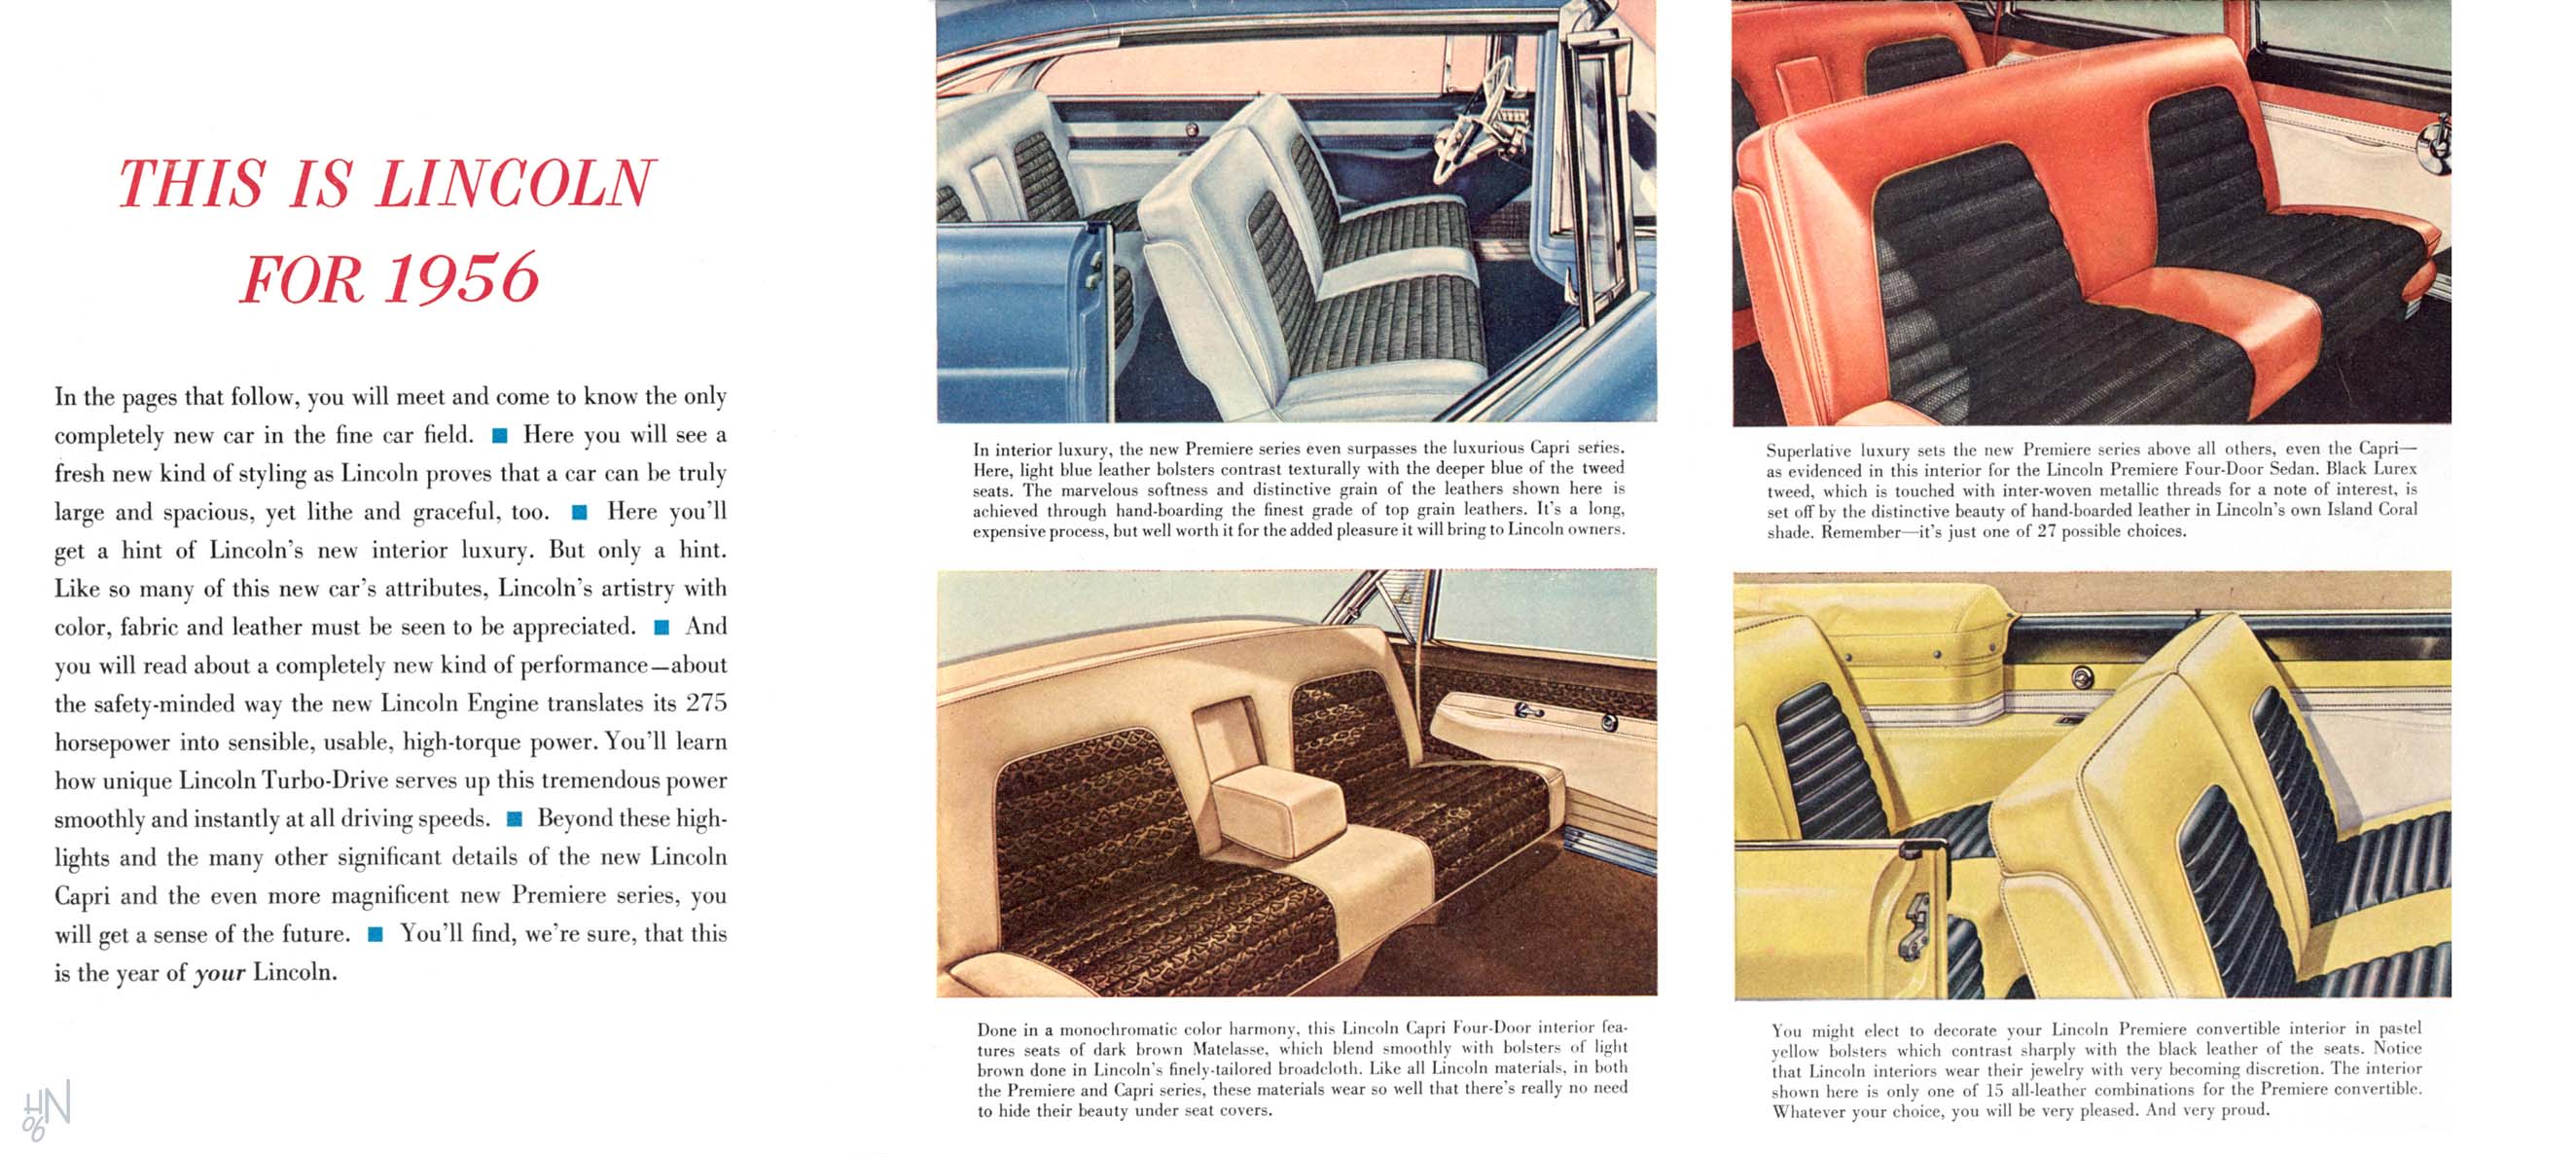 1956 Lincoln Foldout-03